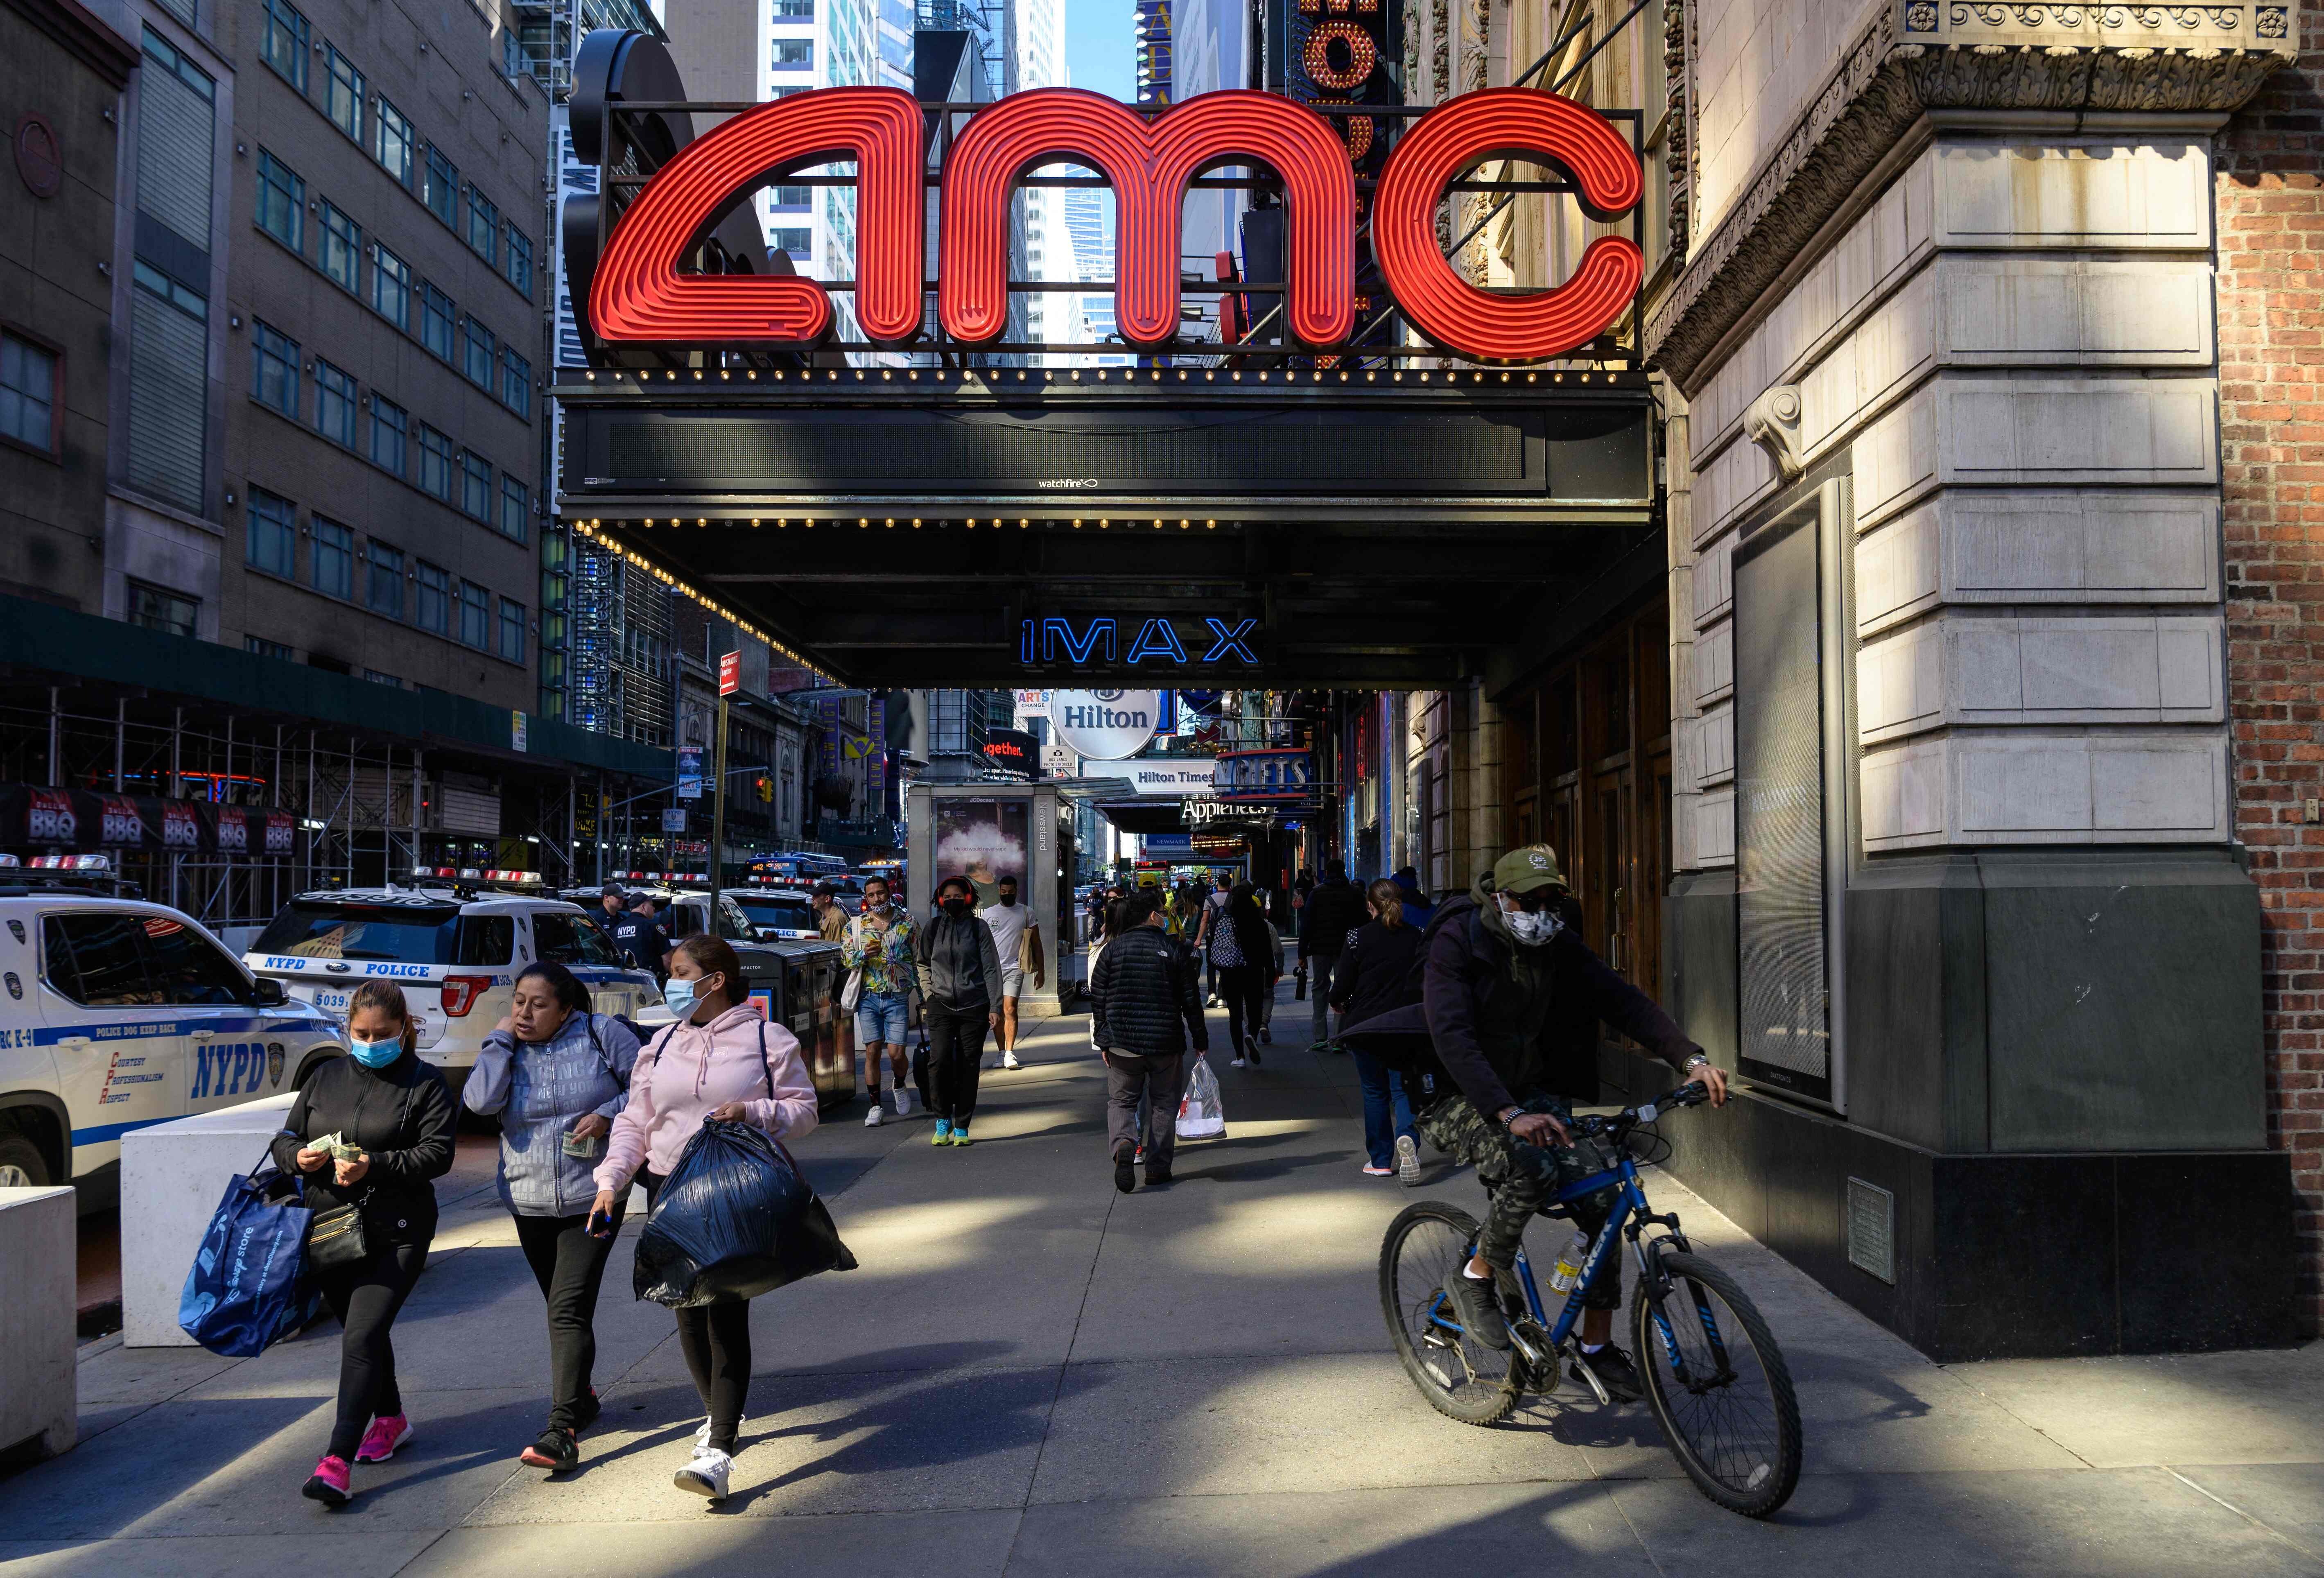 AMC reported a net loss of US$4.6 billion for 2020 on Friday. Photo: AFP